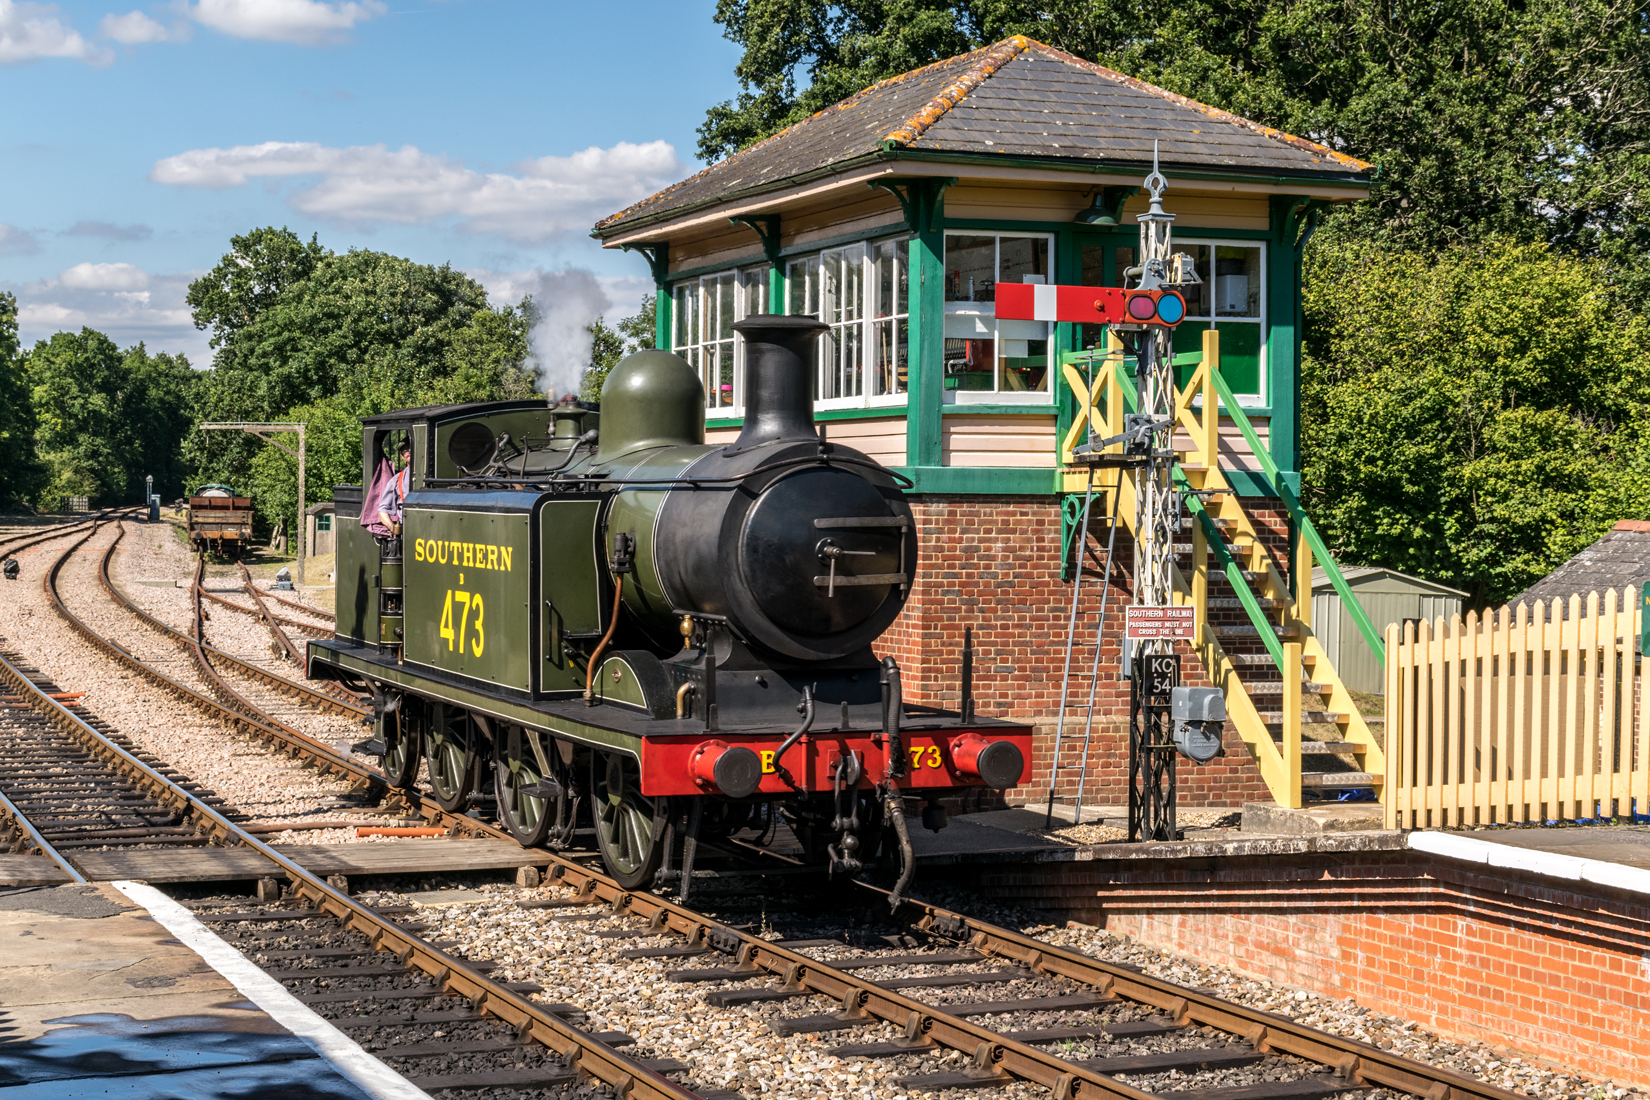 B473 pausing at Kingscote station signal box before completing its run around the goods wagons